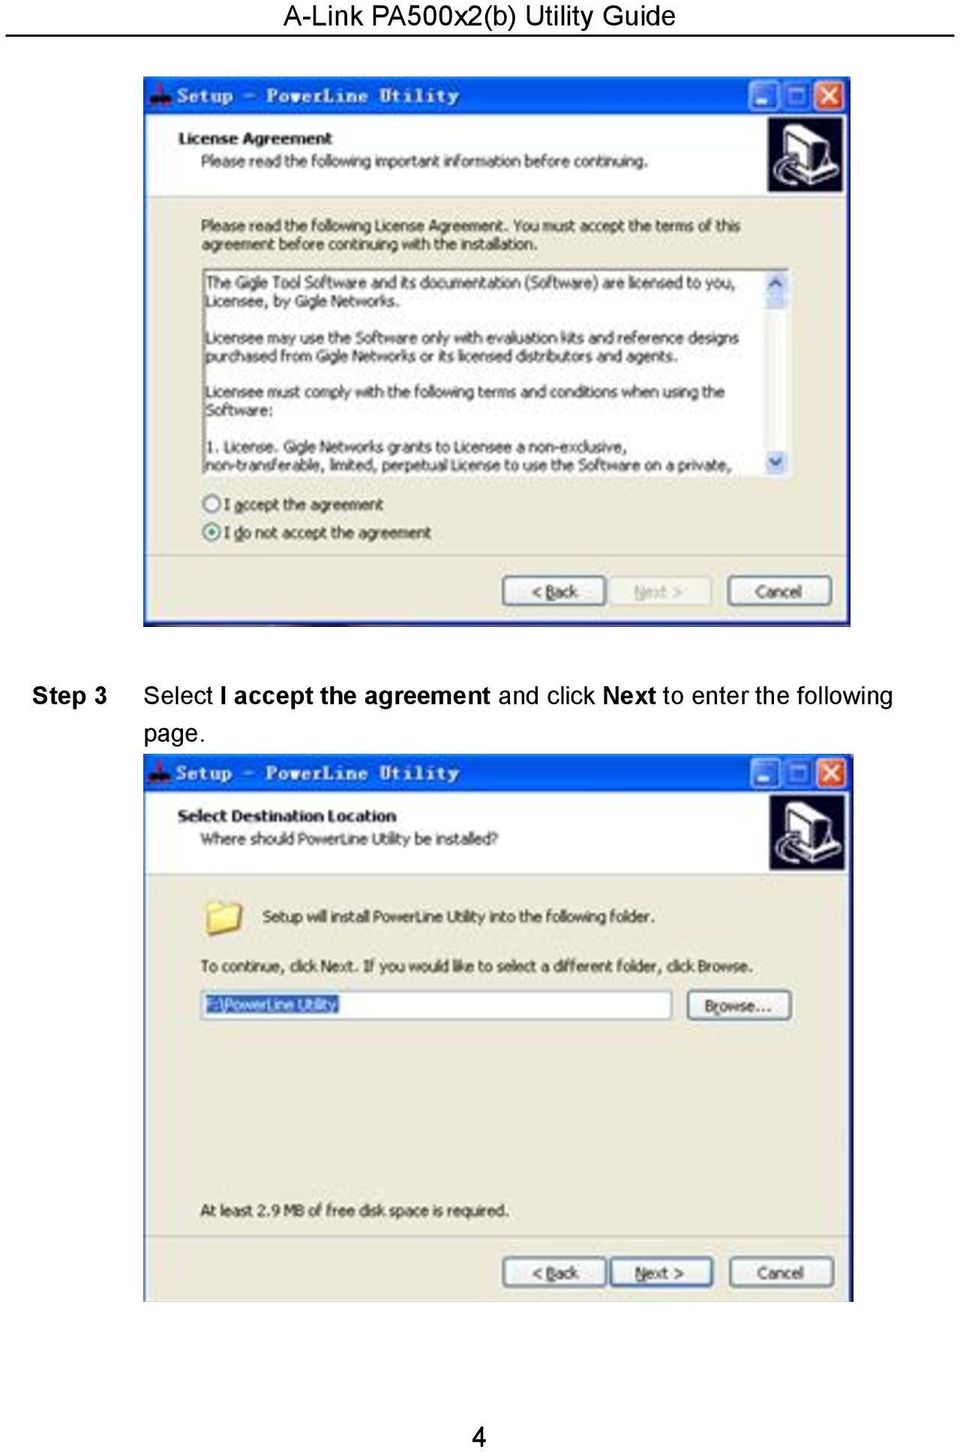 the agreement and click Next